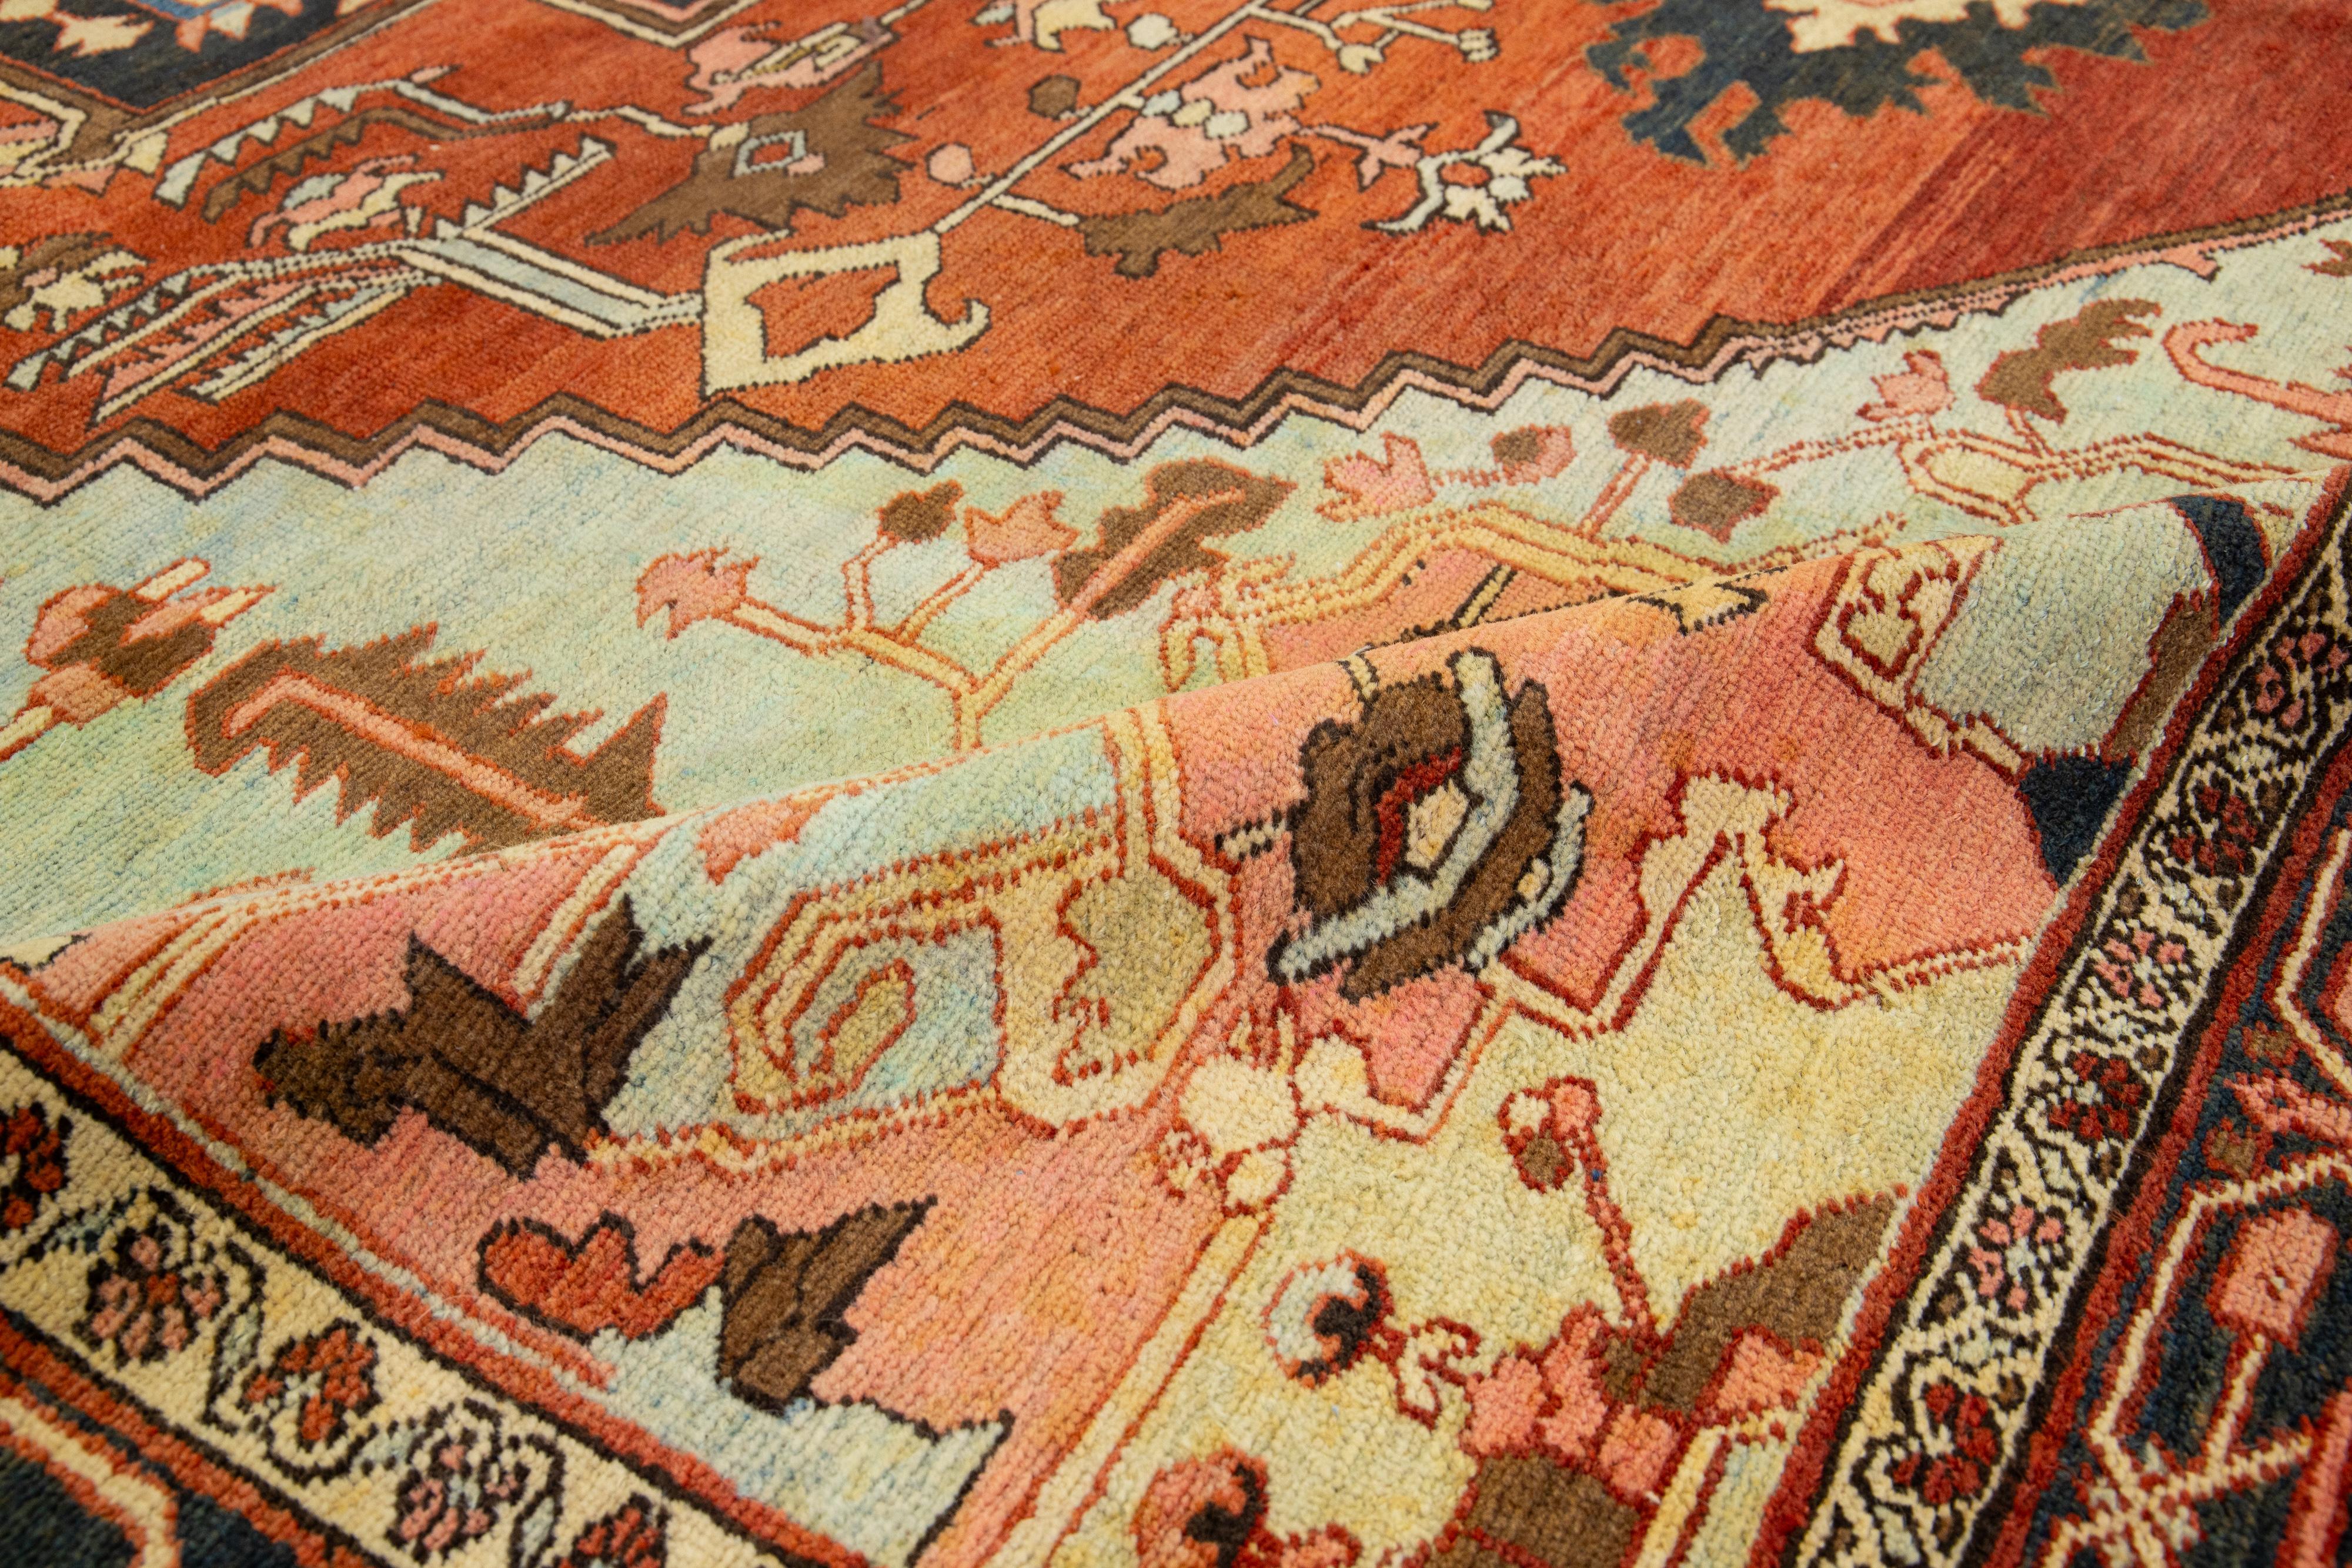 1870s Antique Wool Rug Persian Serapi Featuring a Medallion Motif In Rust Color For Sale 3